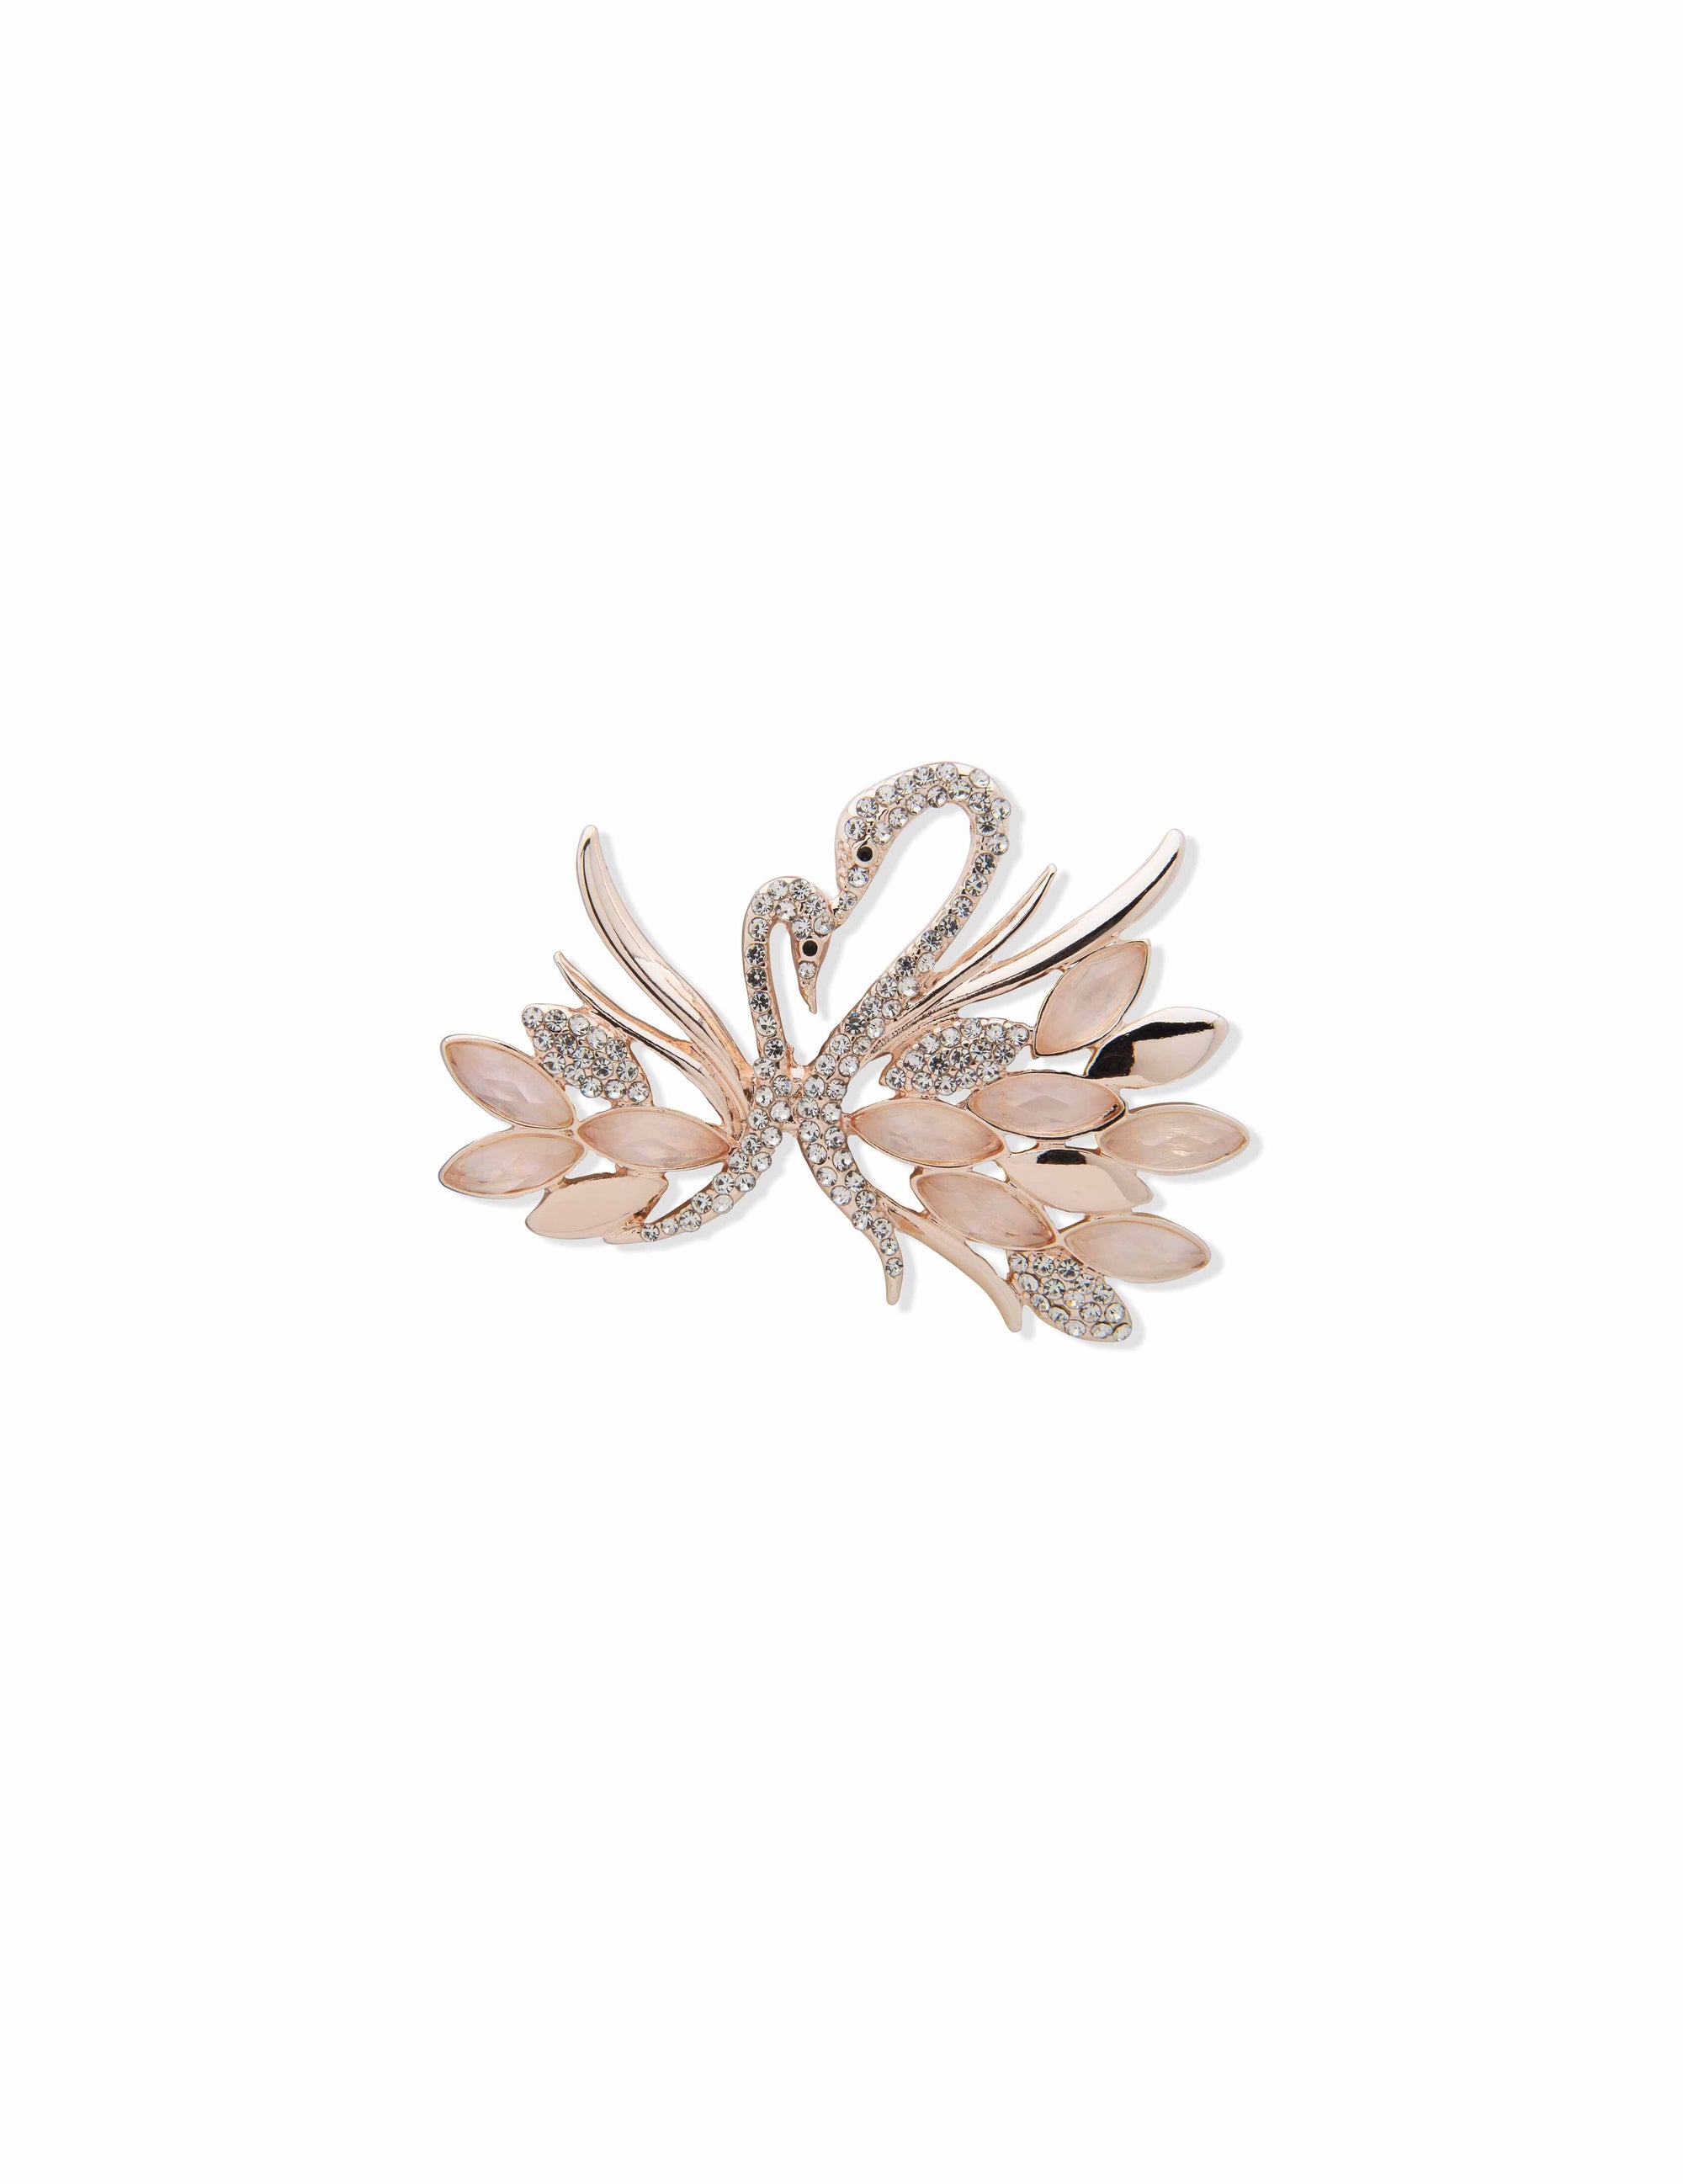 Anne Klein Rose Gold-Tone and Crystal Swan Pin